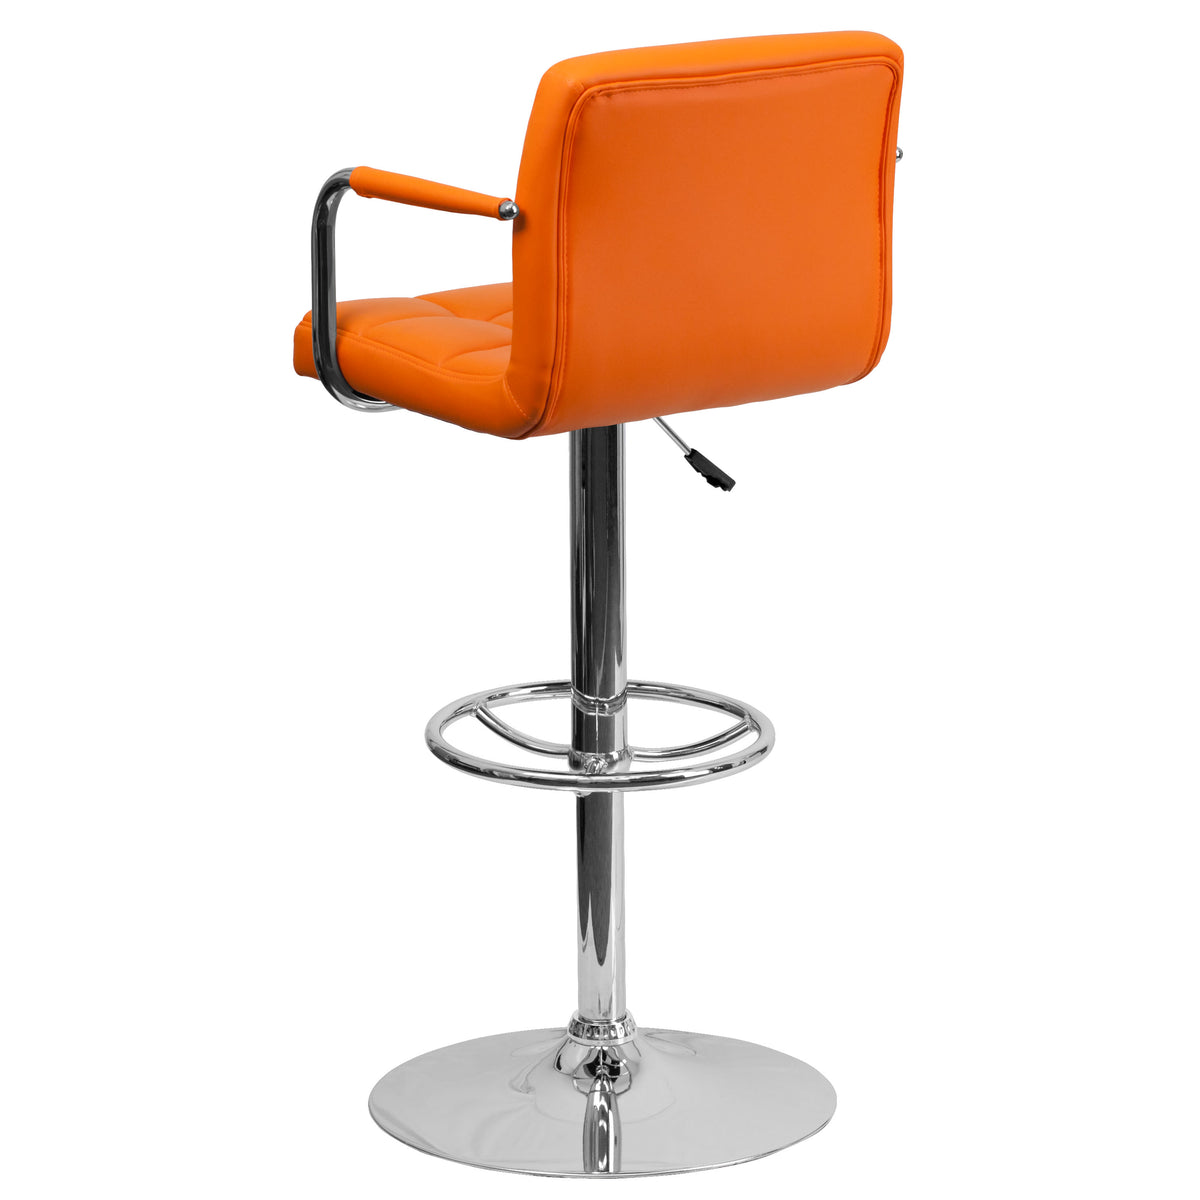 Orange |#| Orange Quilted Vinyl Adjustable Height Barstool with Arms and Chrome Base